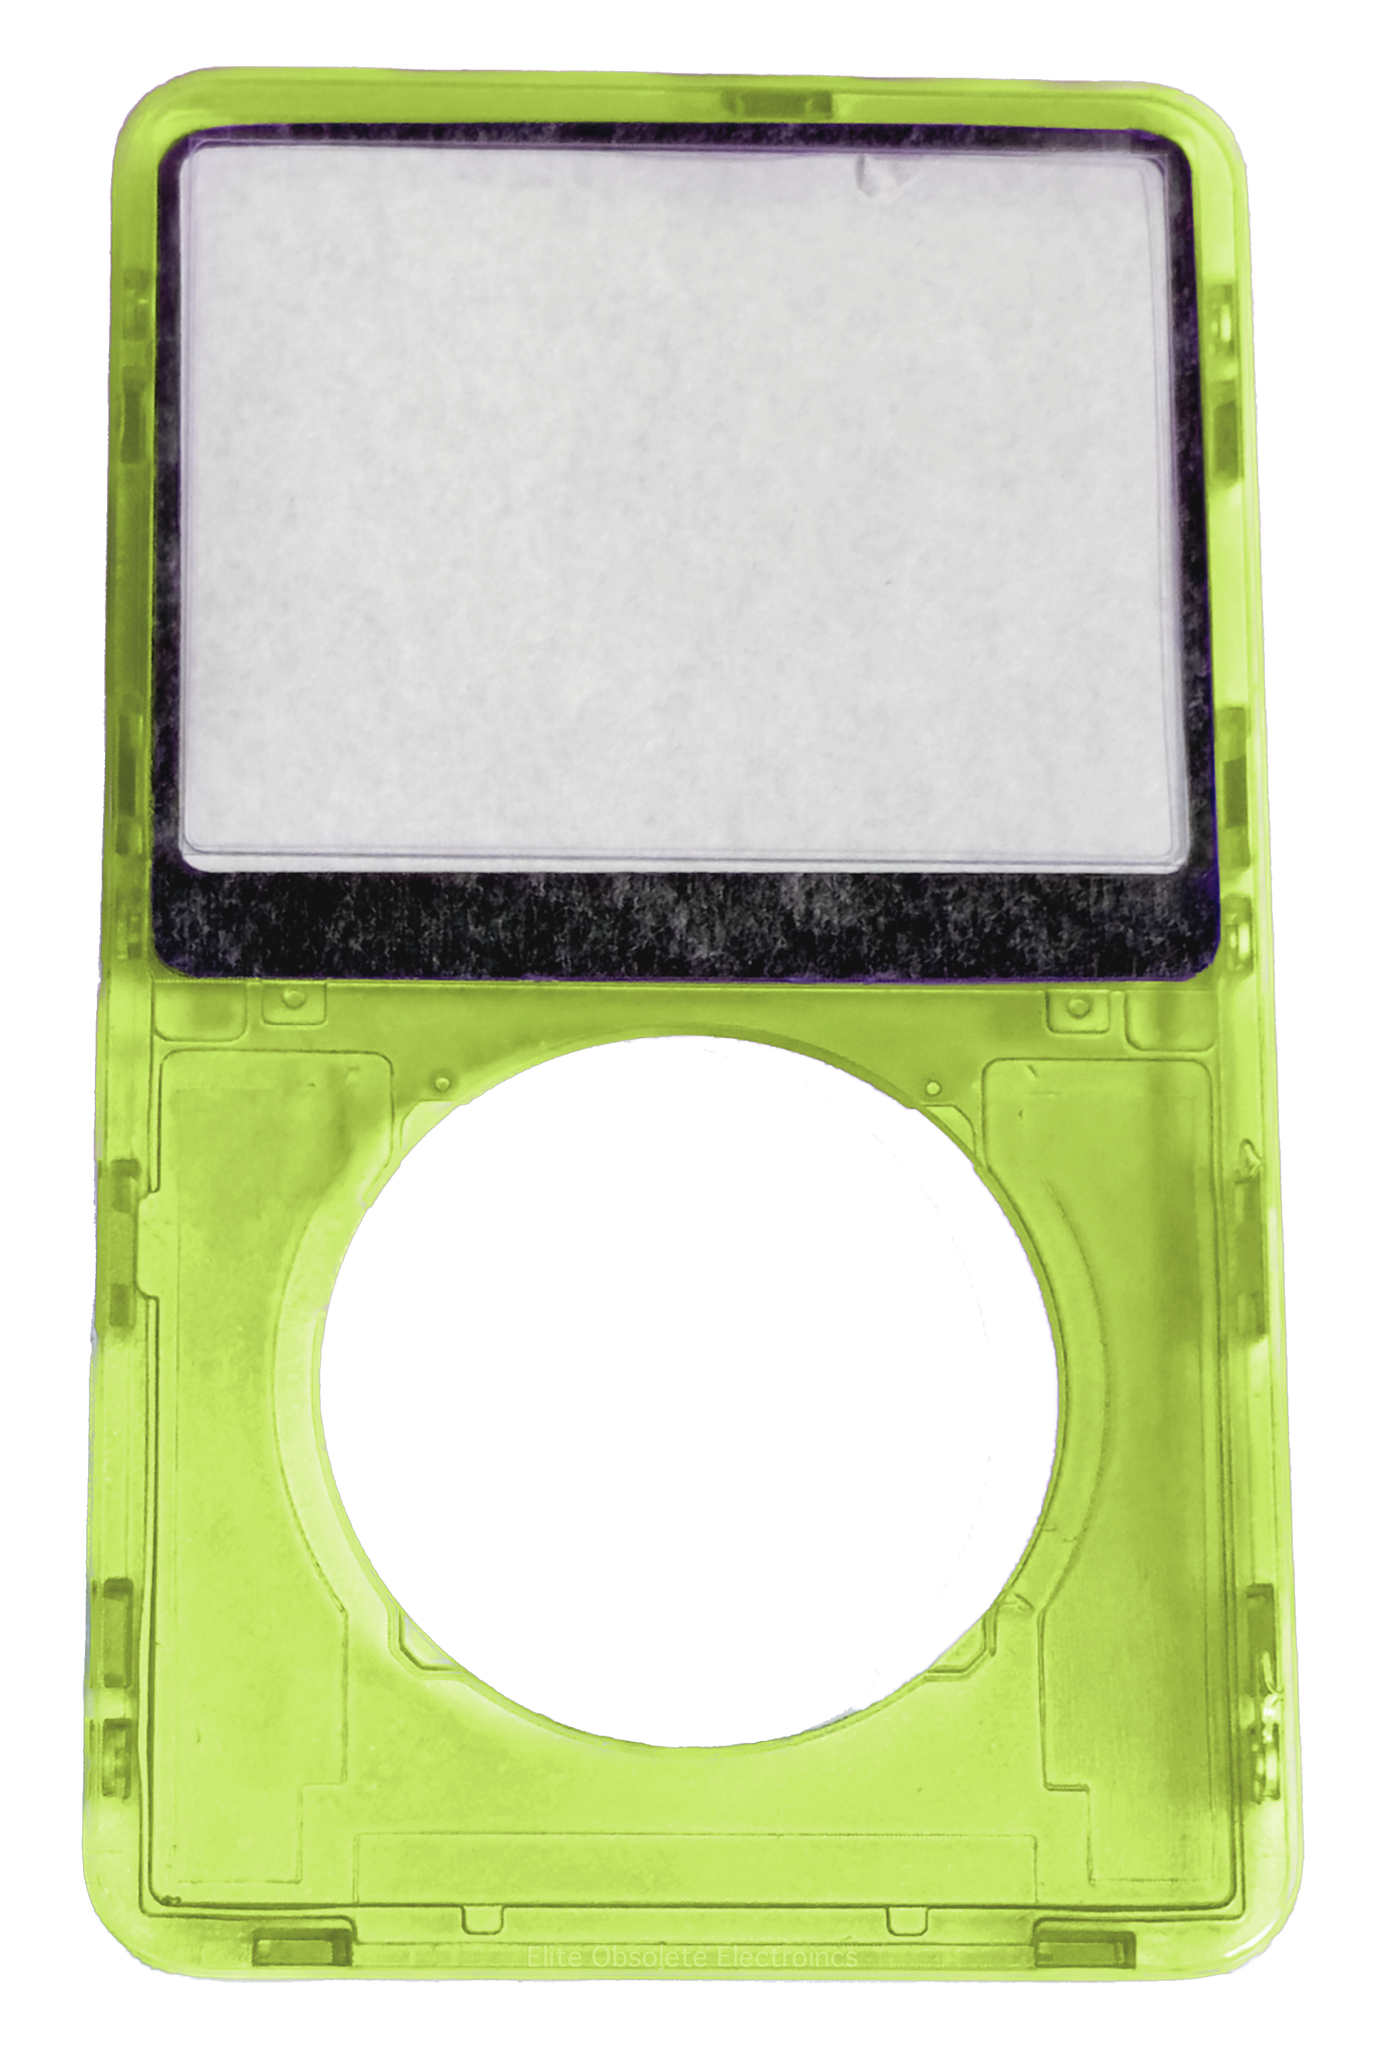 Atomic Highlighter Neon Yellow Transparent Clear Faceplate For Apple iPod Video 5th & 5.5 Generation Plastic